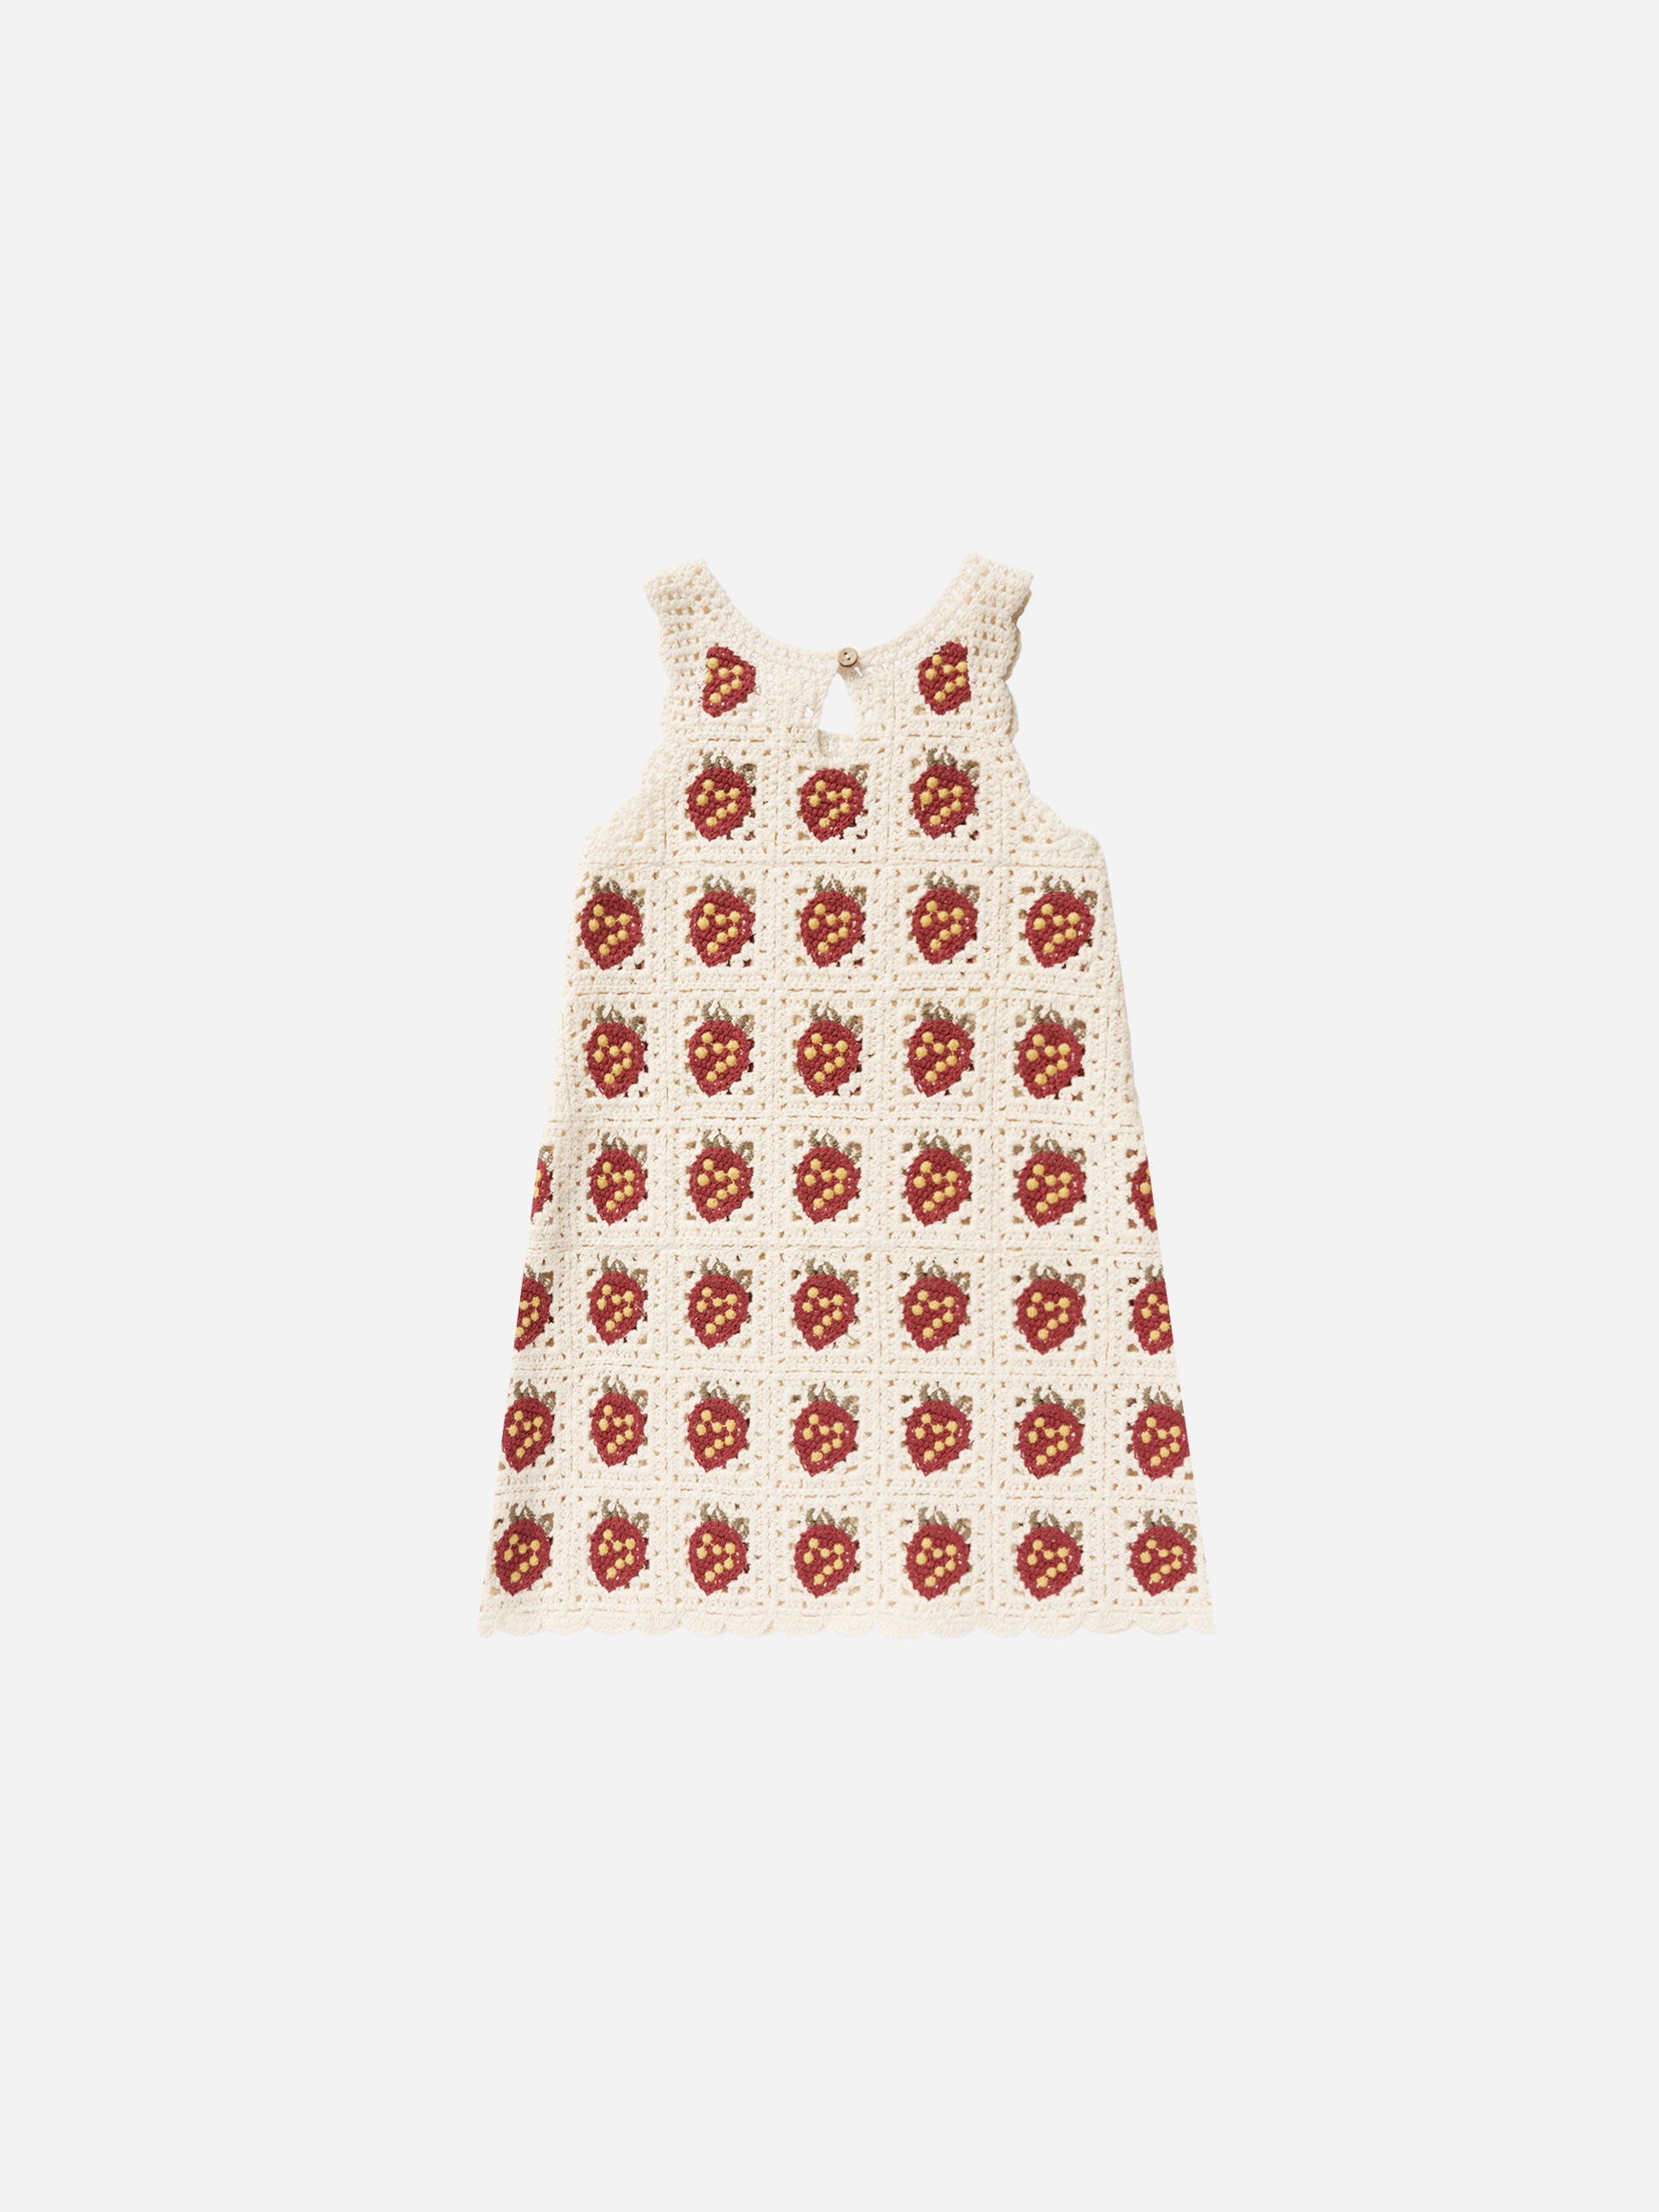 Crochet Tank Mini Dress || Strawberry - Rylee + Cru | Kids Clothes | Trendy Baby Clothes | Modern Infant Outfits |